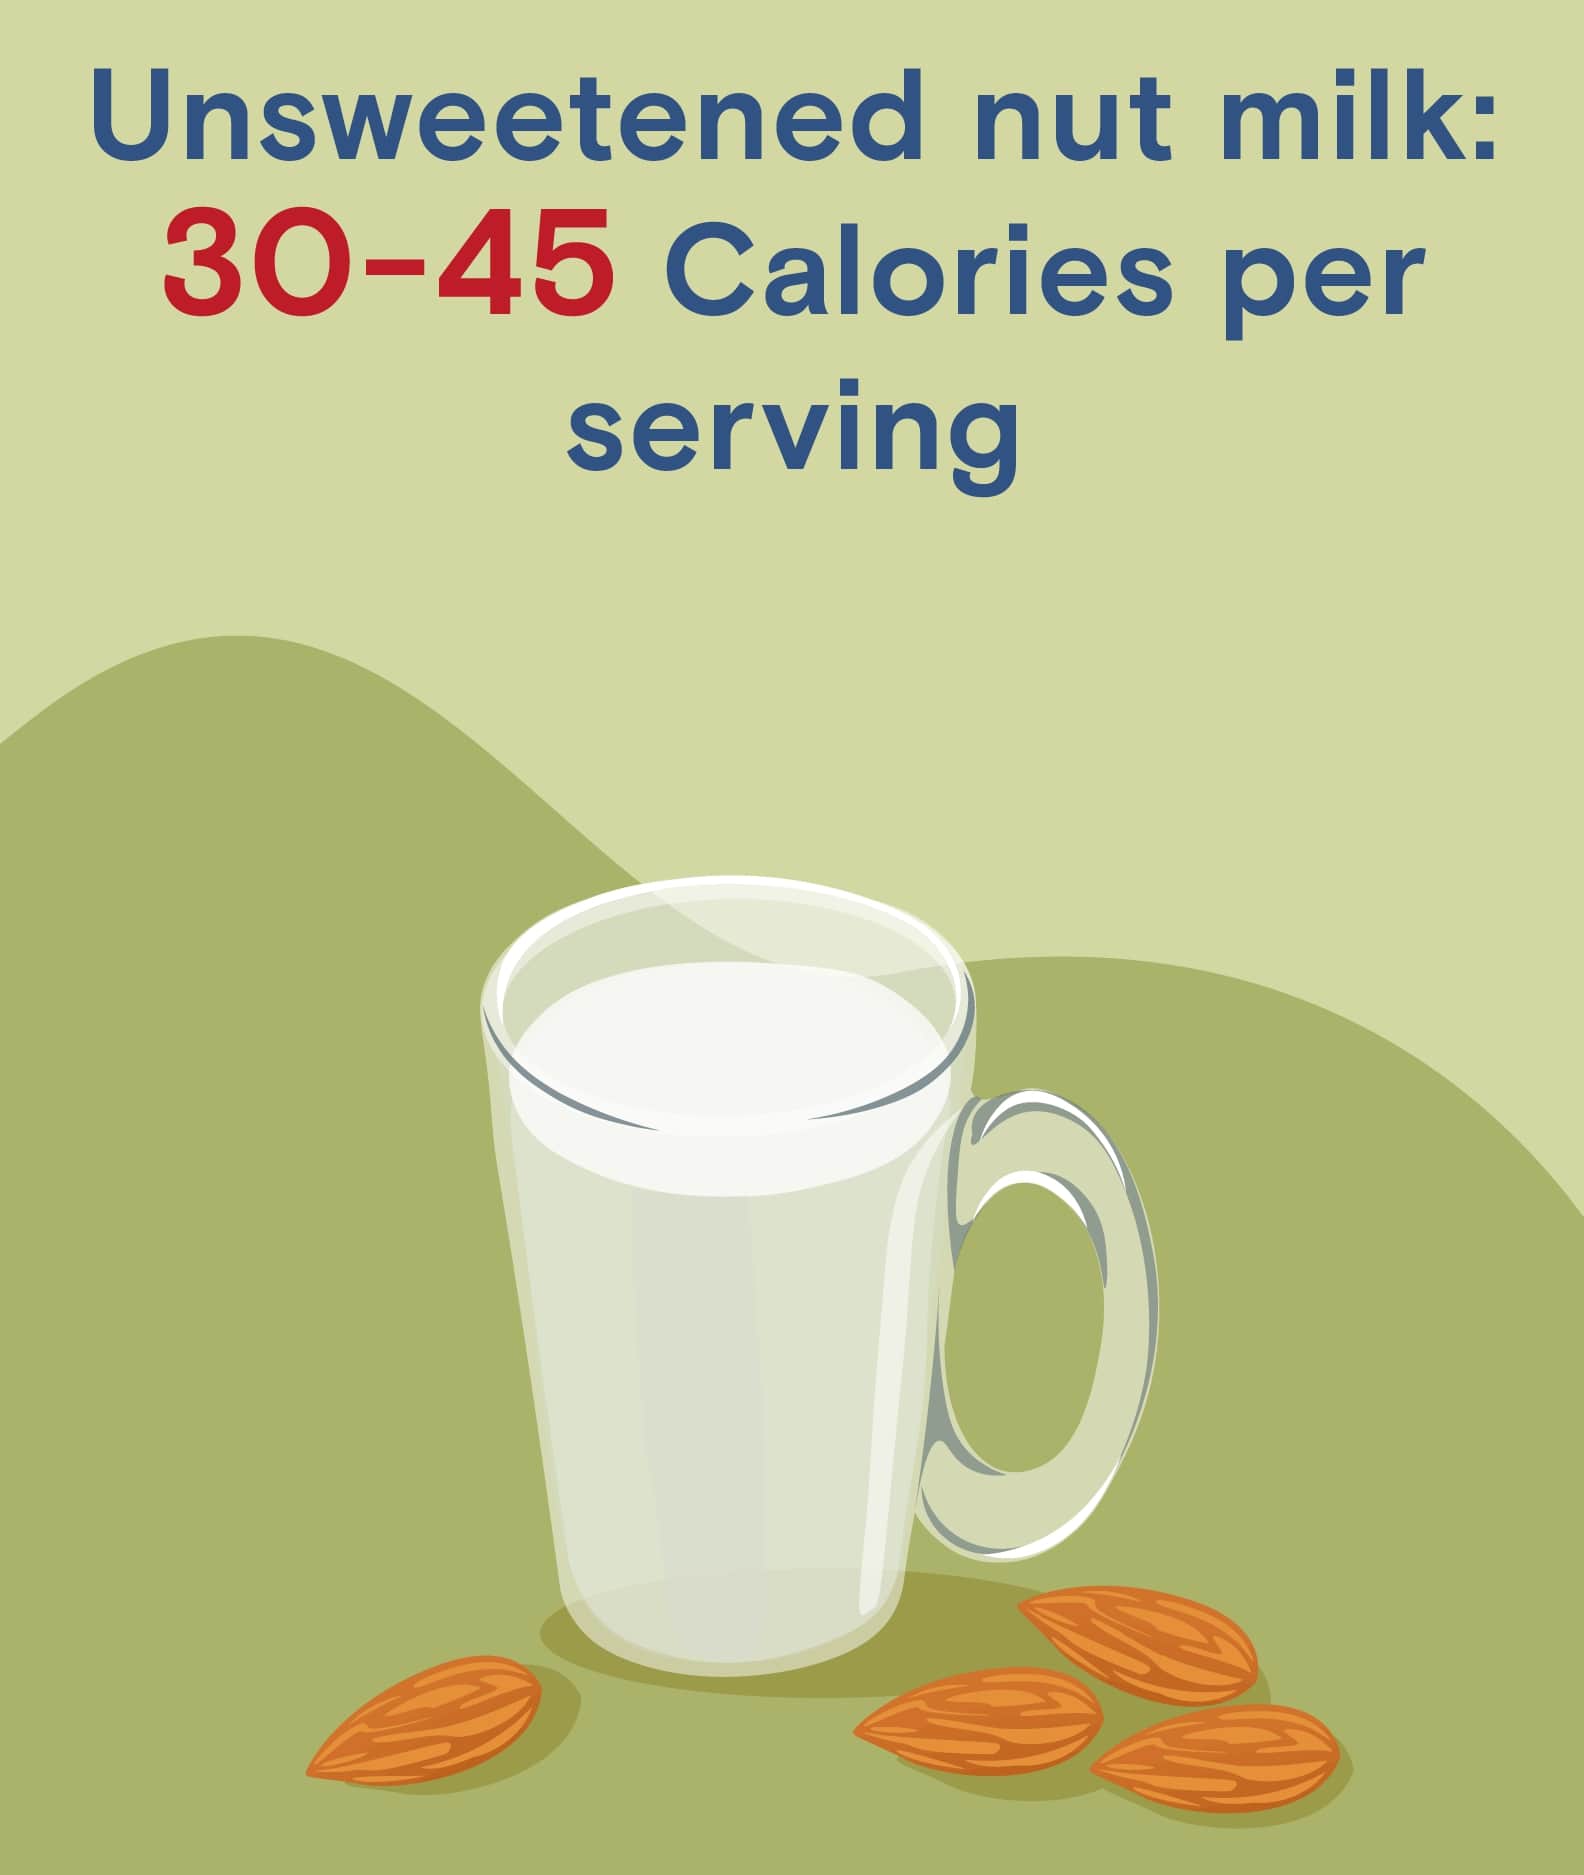 Unsweetened nut milk contains 30-45 calories per serving